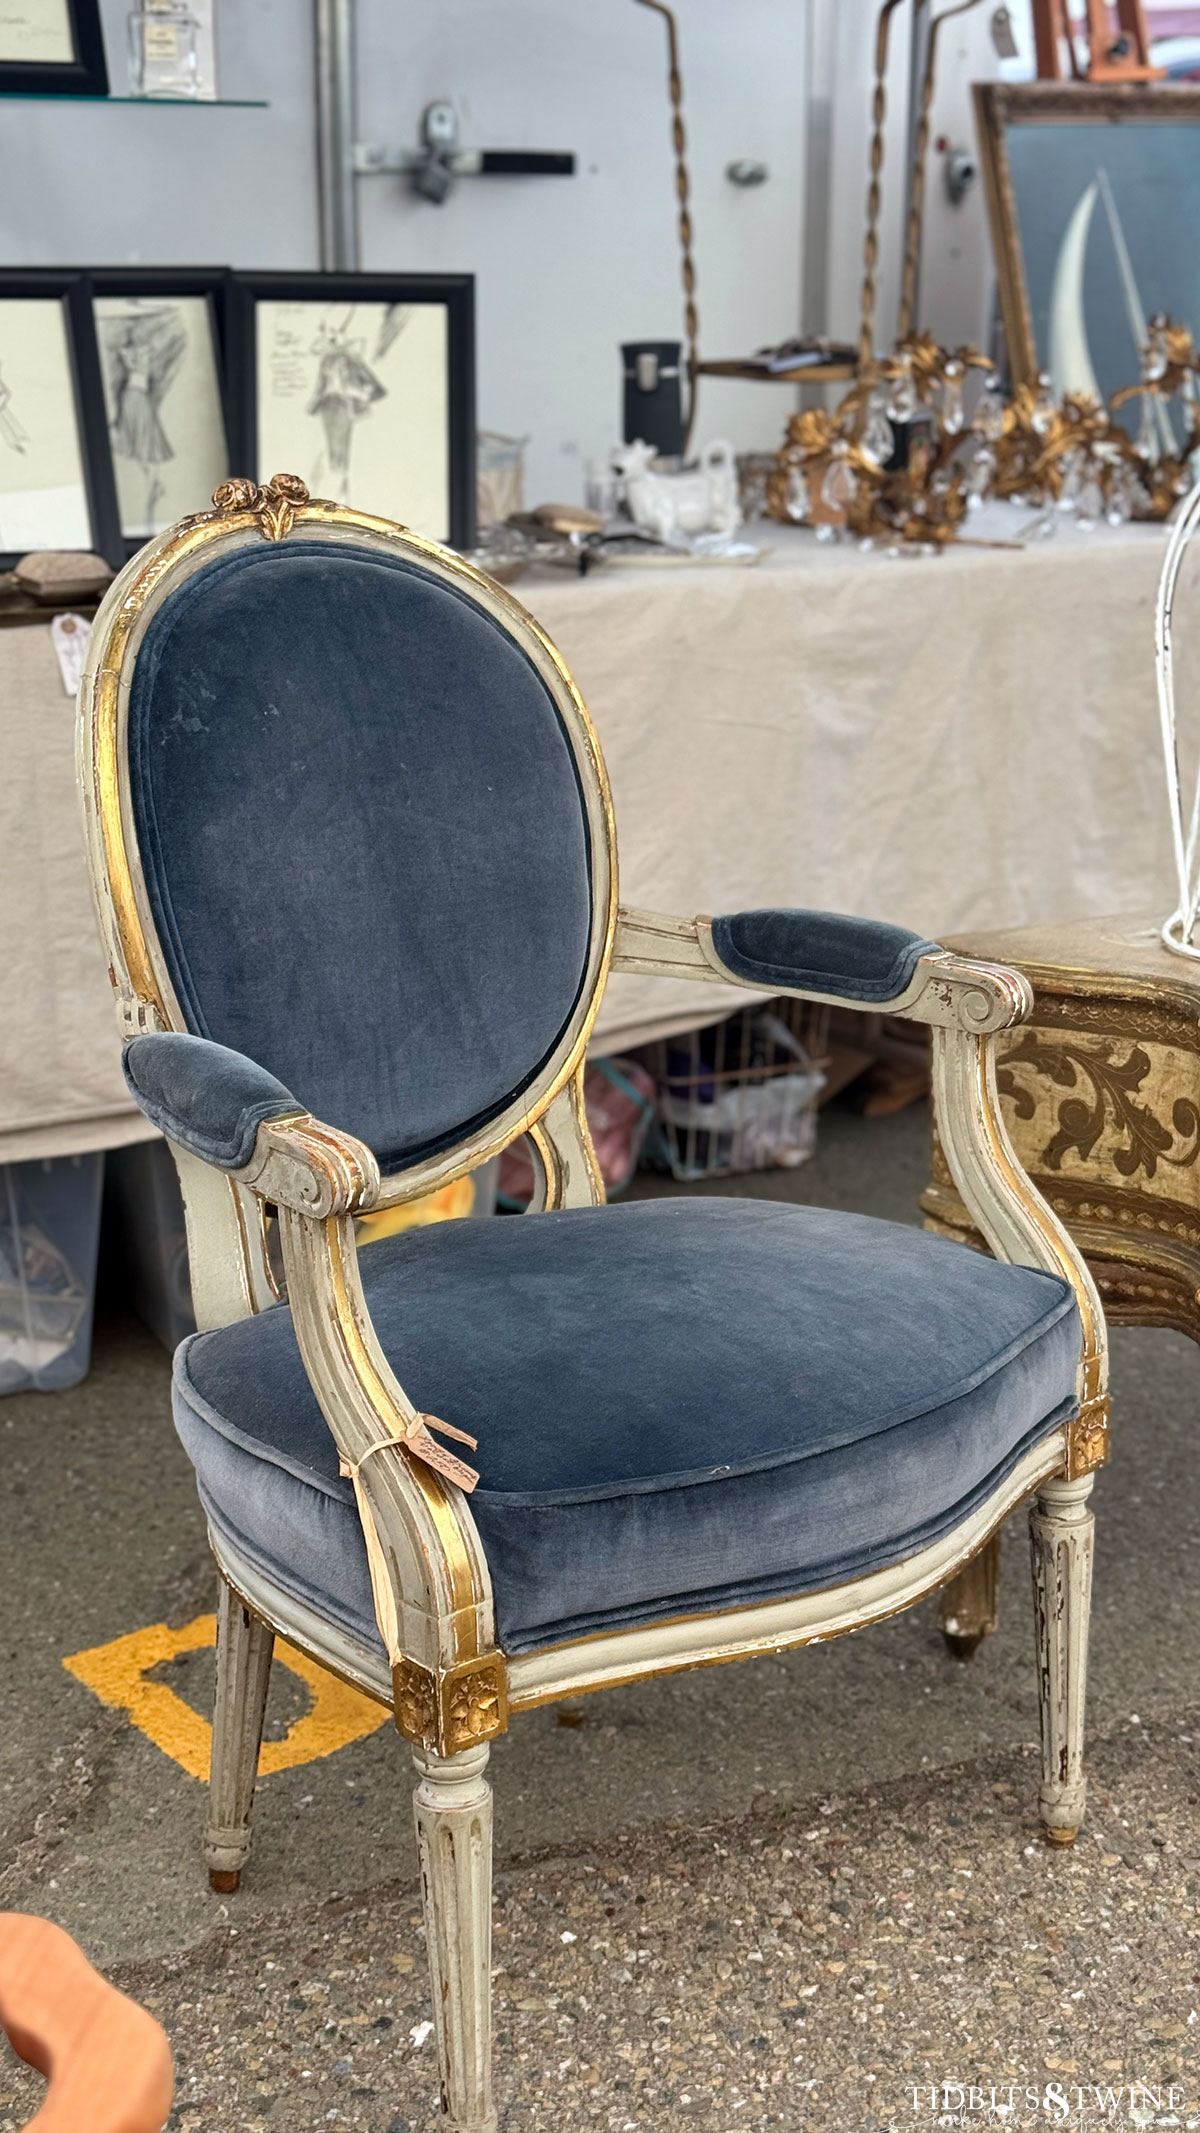 blue velvet upholstery on an antique french chair on display at an antique fair